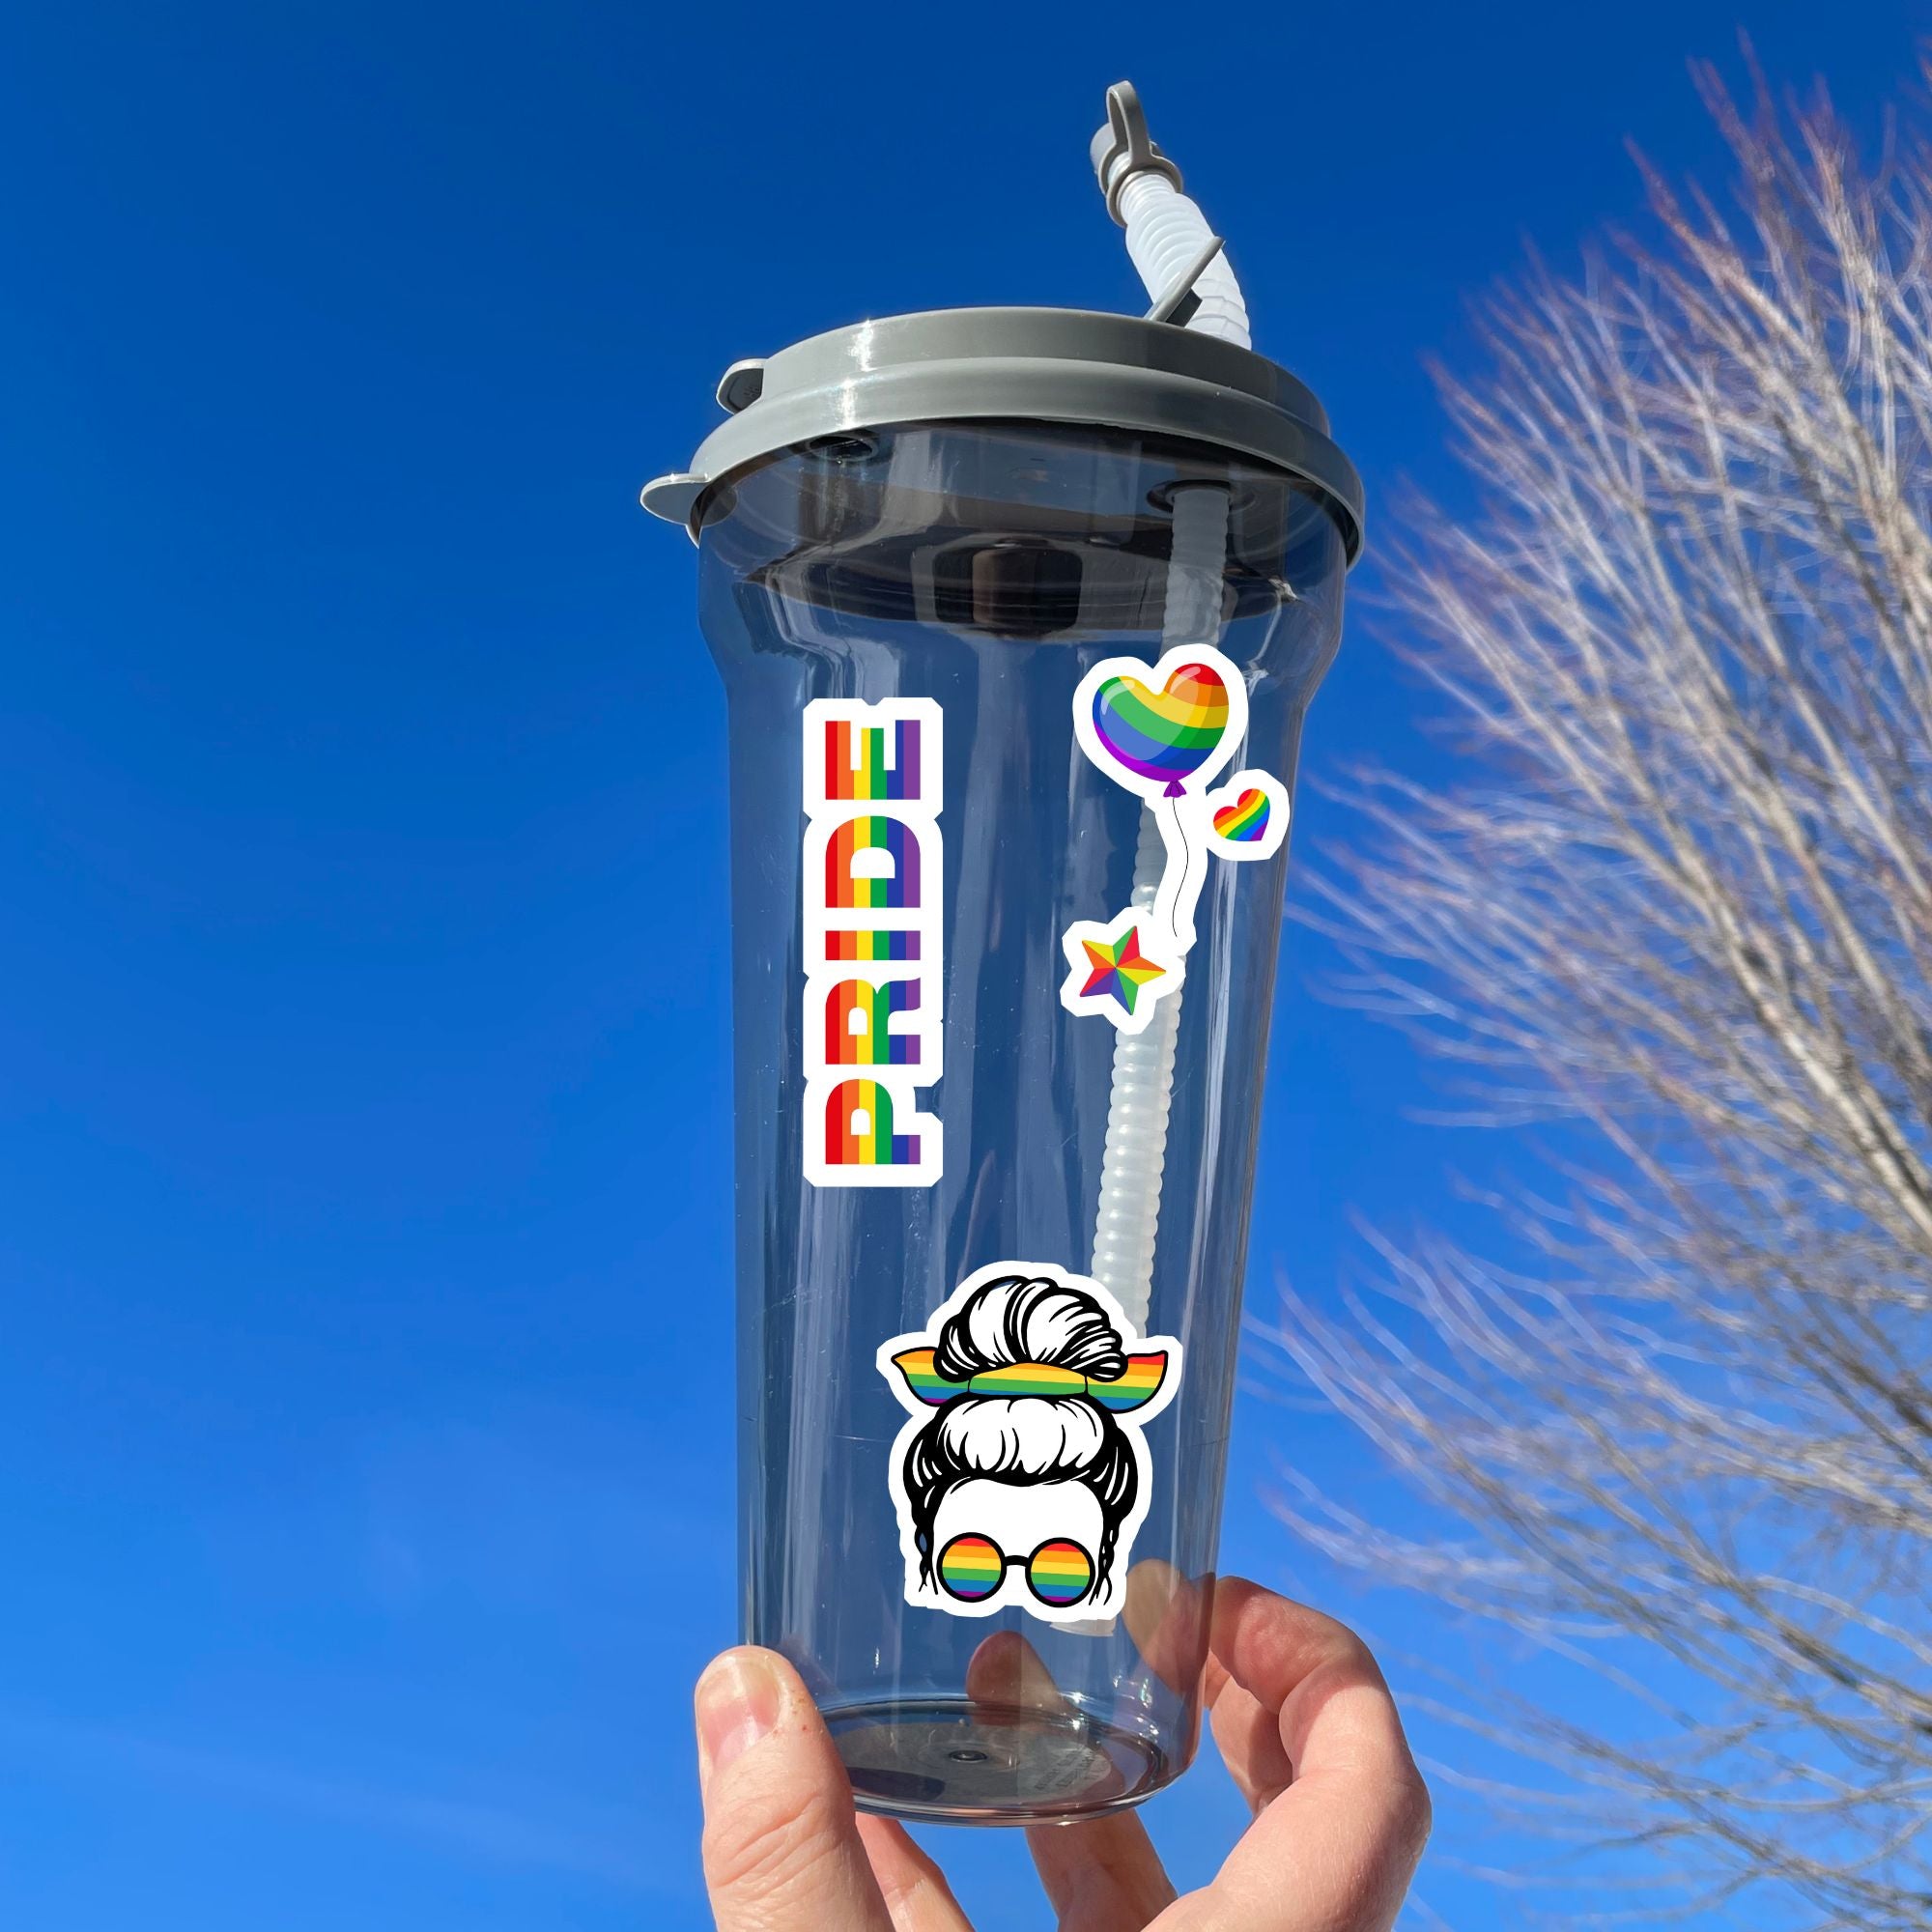 Show your LGBTQ Pride with this sticker sheet! This sticker sheet is filled with rainbow Pride images that are perfect for anywhere you want to show your Pride. This image is of a water bottle with a large Pride sticker along with a rainbow heart balloon sticker and a sticker of a woman's head with rainbow glasses and a rainbow bow in her hair.